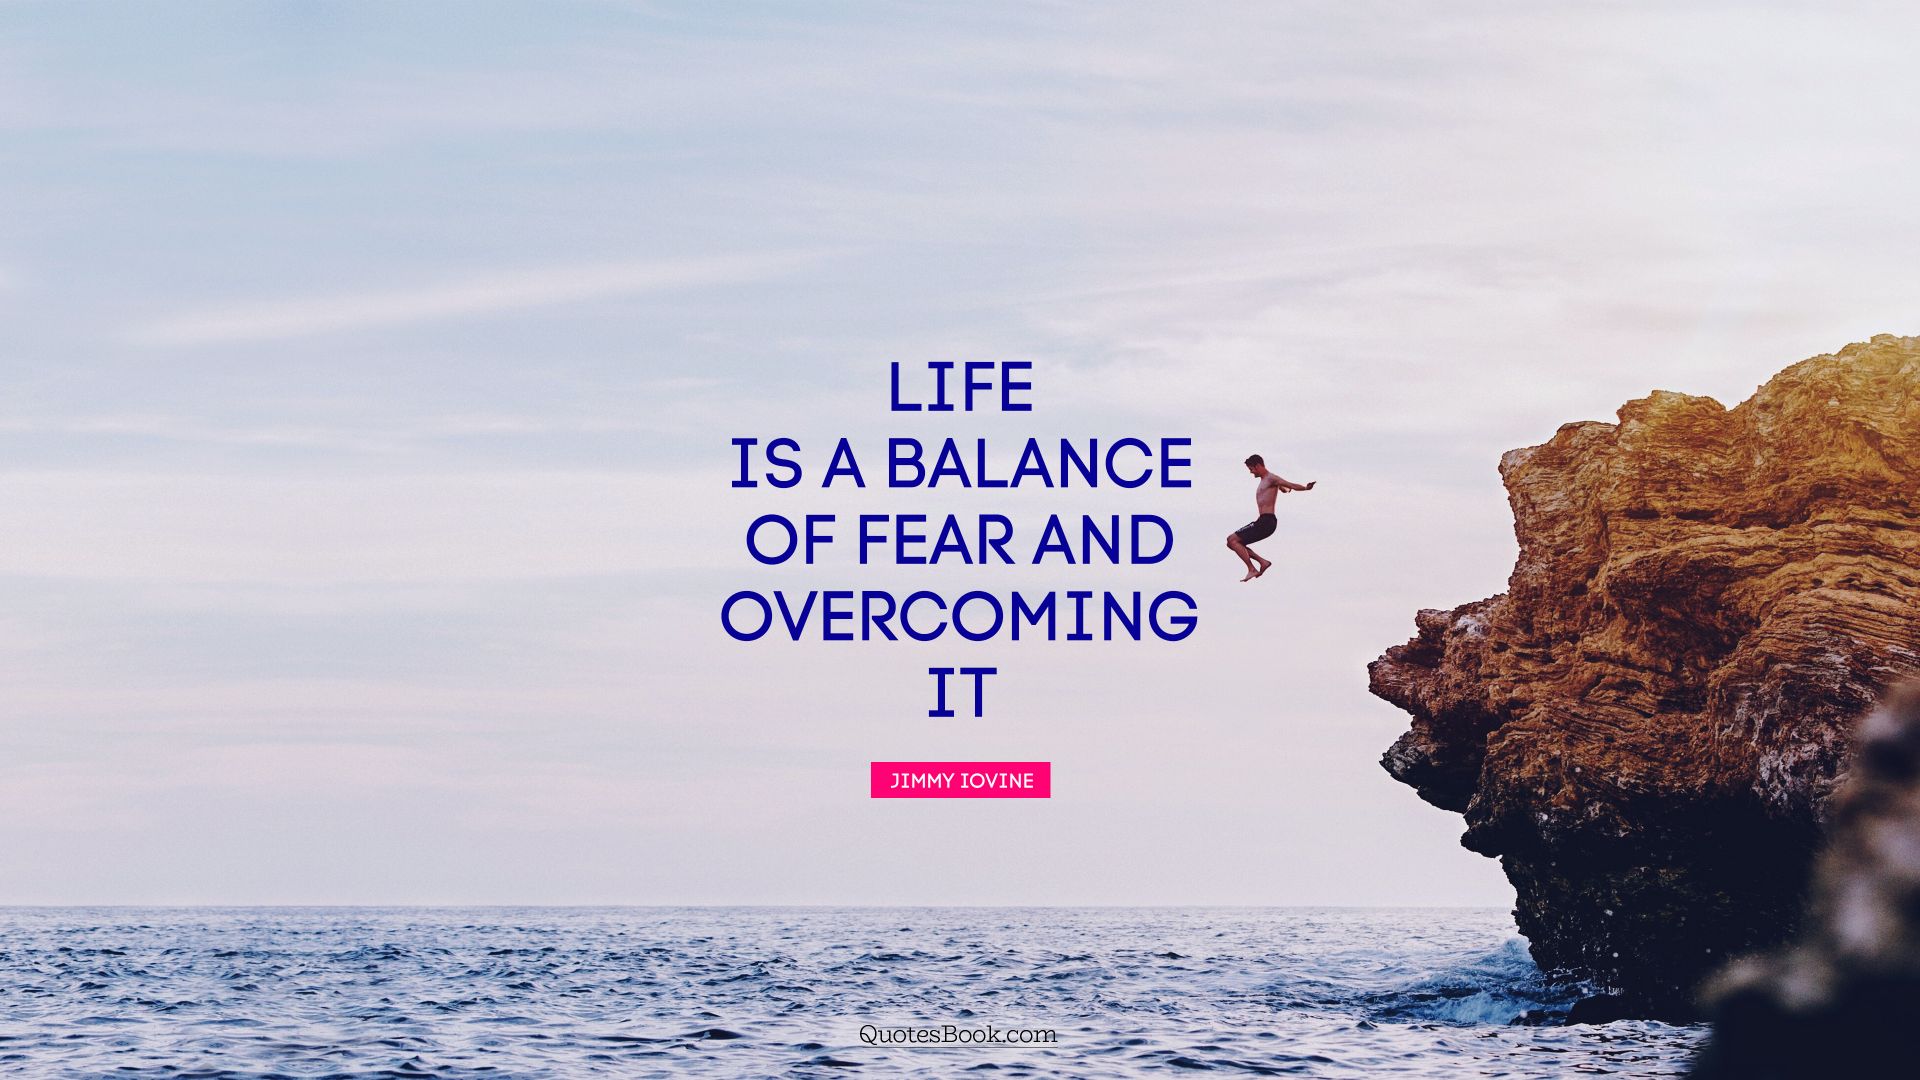 Life is a balance of fear and overcoming it. - Quote by Jimmy Iovine